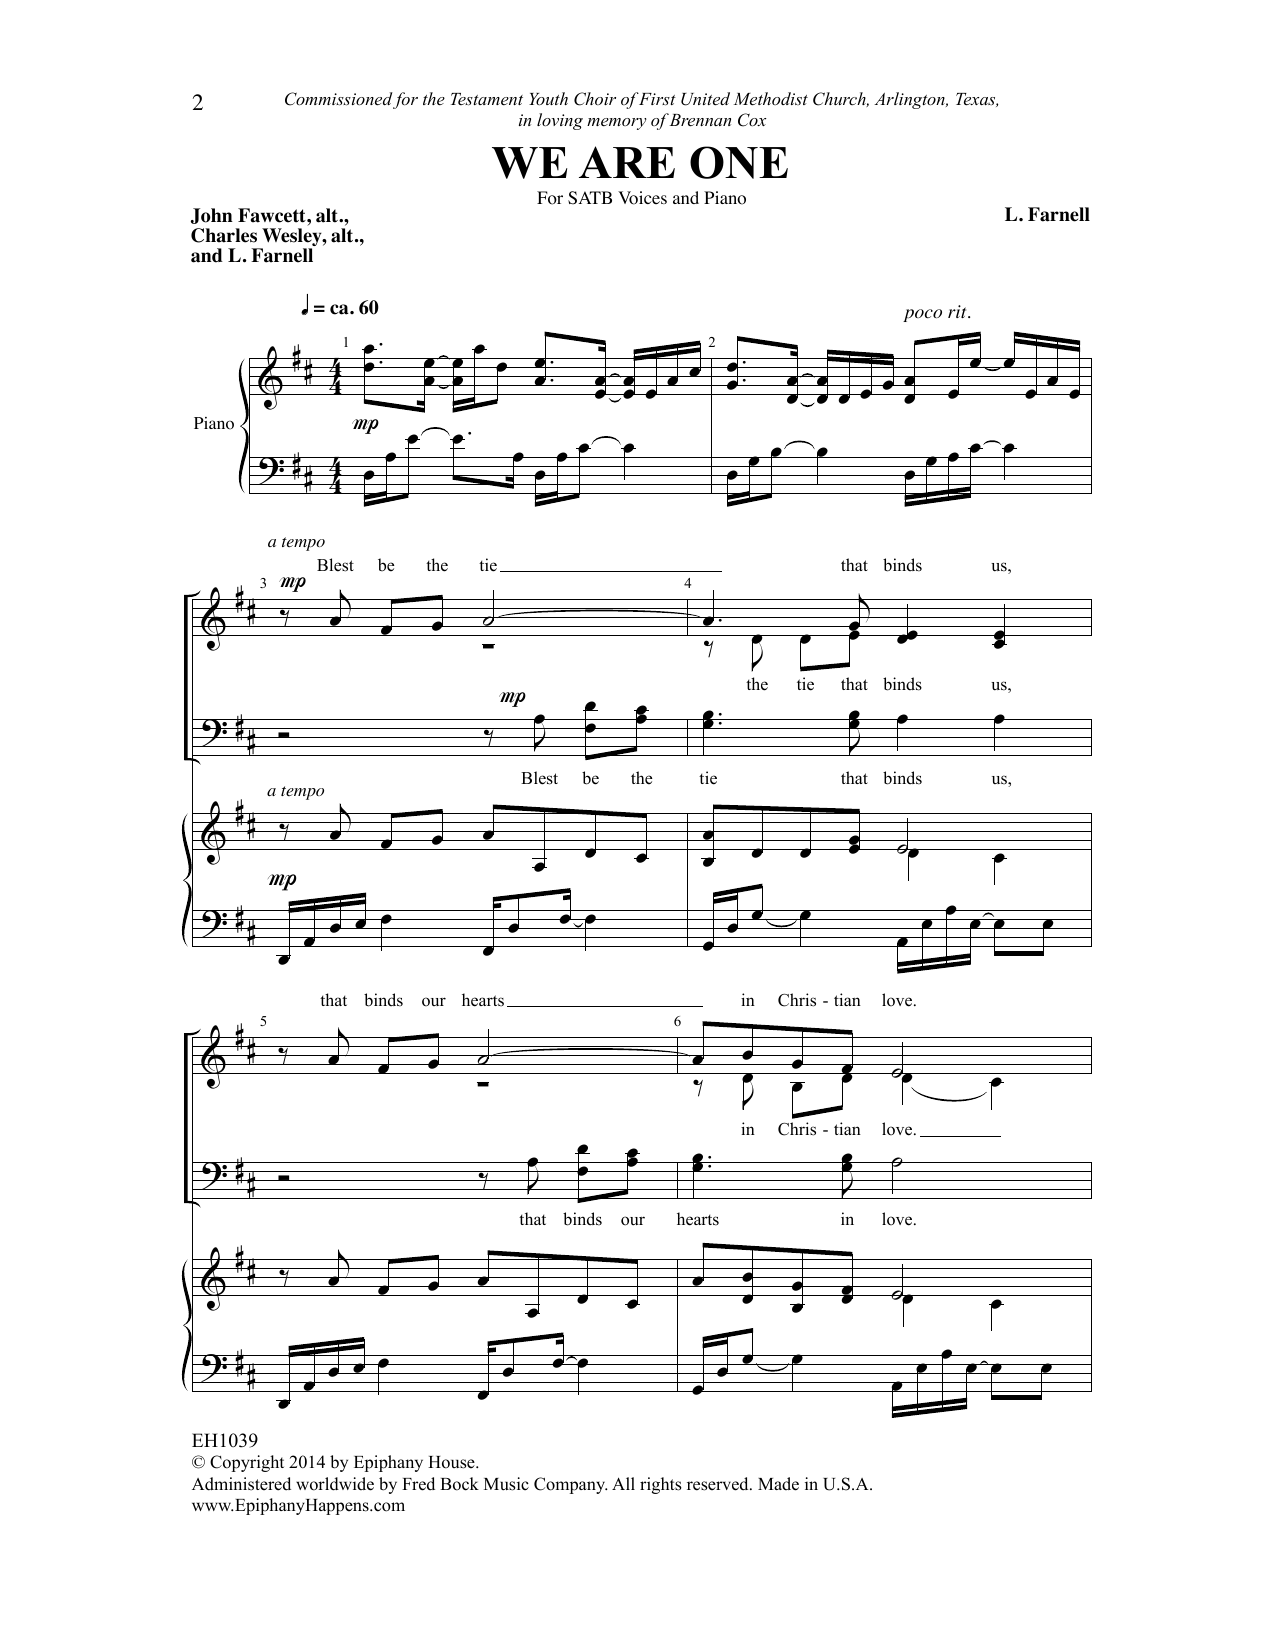 Download Laura Farnell We Are One Sheet Music